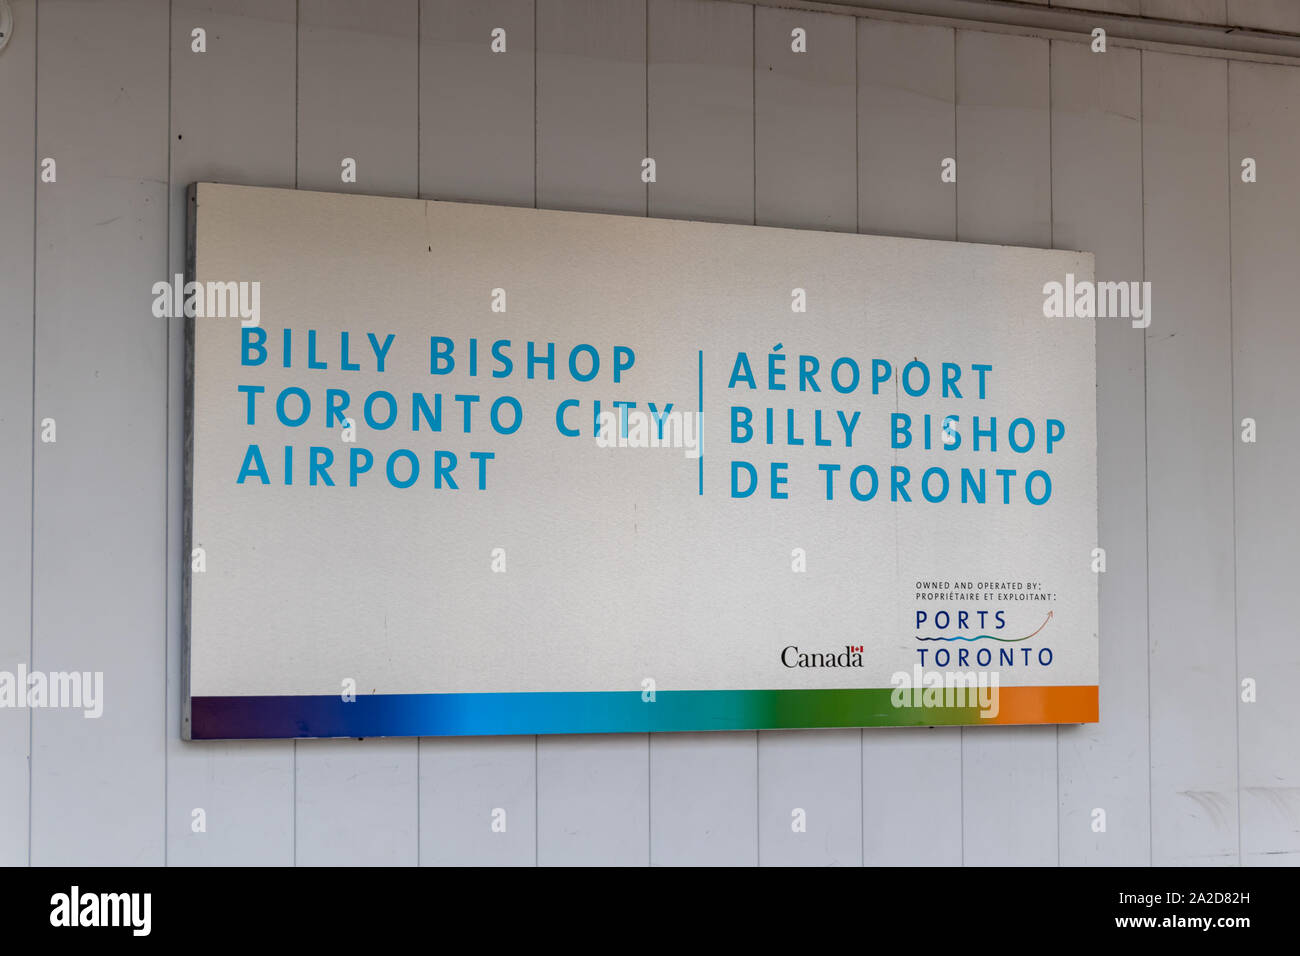 Billy Bishop Toronto City Airport segno in francese e inglese al terminal continentale. Foto Stock